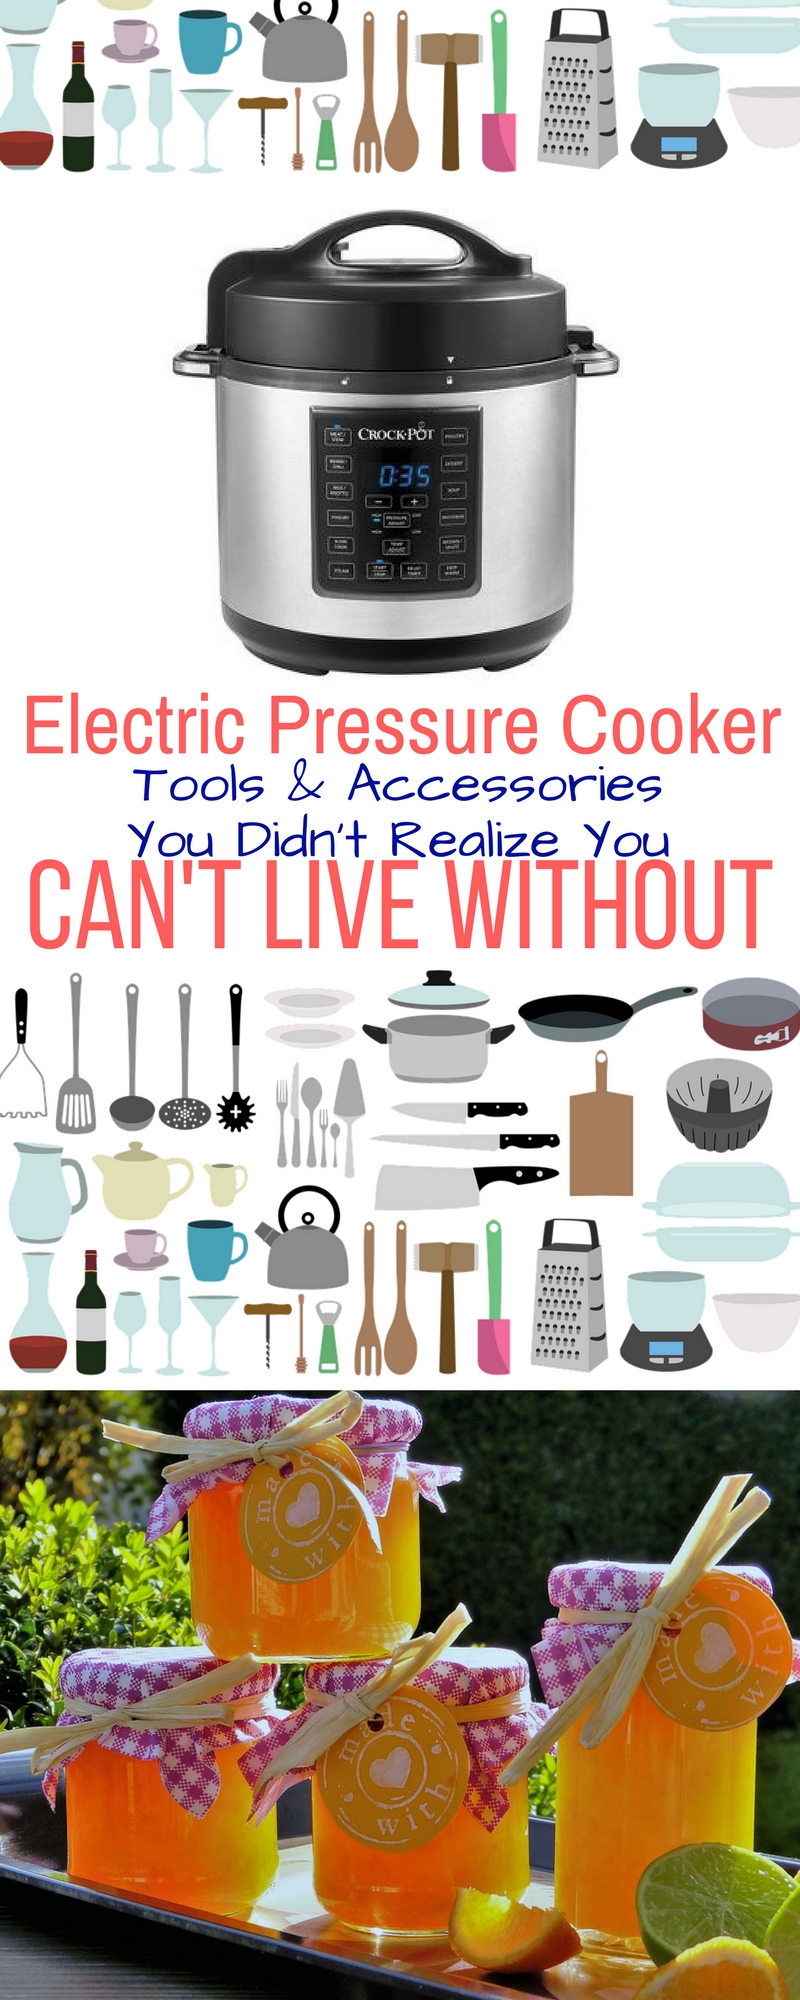 Electric Pressure Cooker Pressure Cooker Tools These electric pressure cooker tools and accessories will help you use your pressure cooker to its fullest! There are all sorts of fun and unusual stuff you can do with your electric pressure cooker.  But, you'll need a few handy tools and accessories to make the most out of your handy little kitchen appliance!